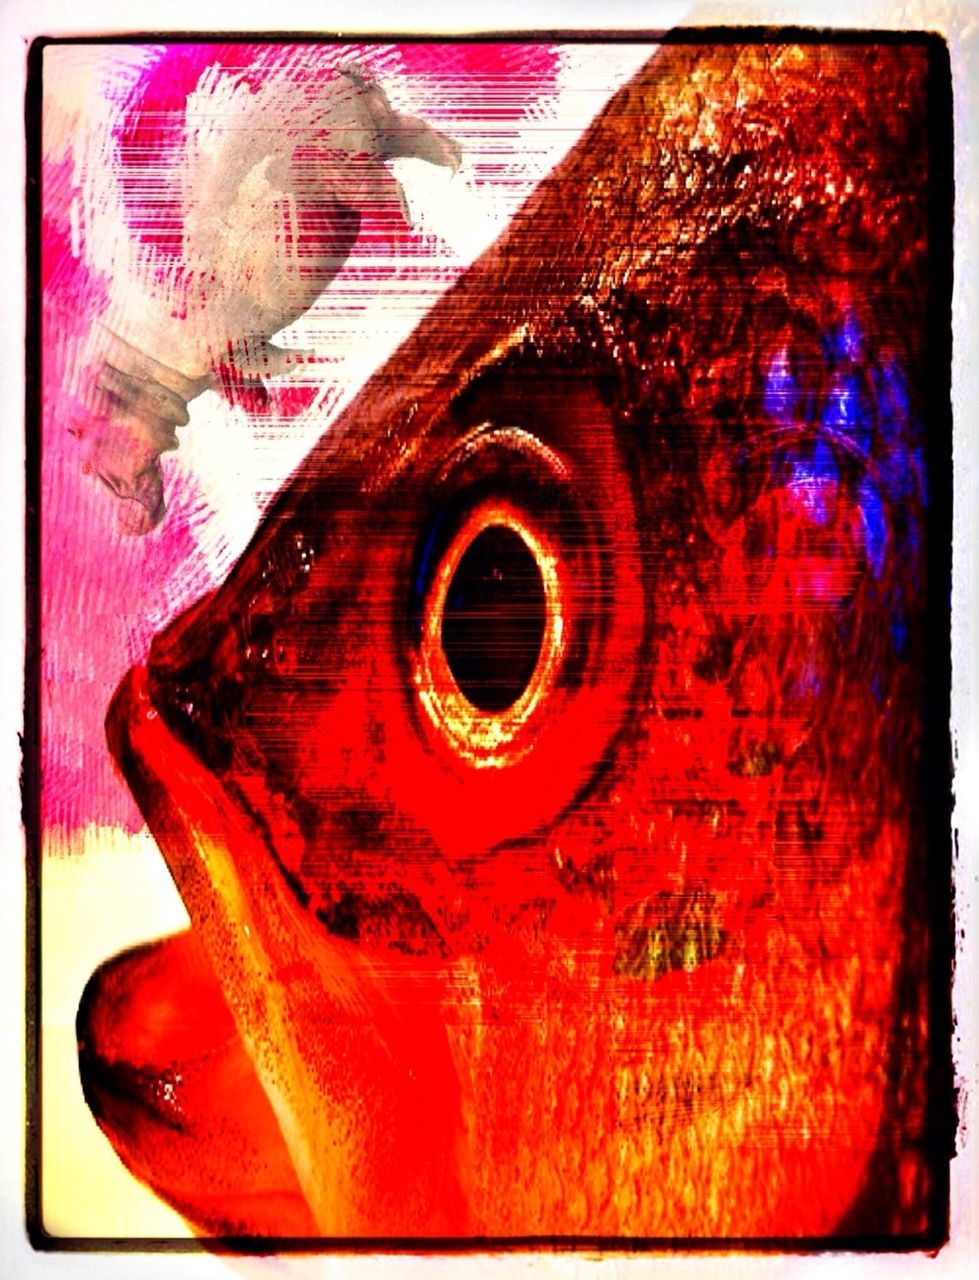 transfer print, auto post production filter, close-up, art and craft, still life, red, creativity, art, indoors, animal representation, single object, no people, human representation, old, wood - material, ideas, detail, metal, anthropomorphic face